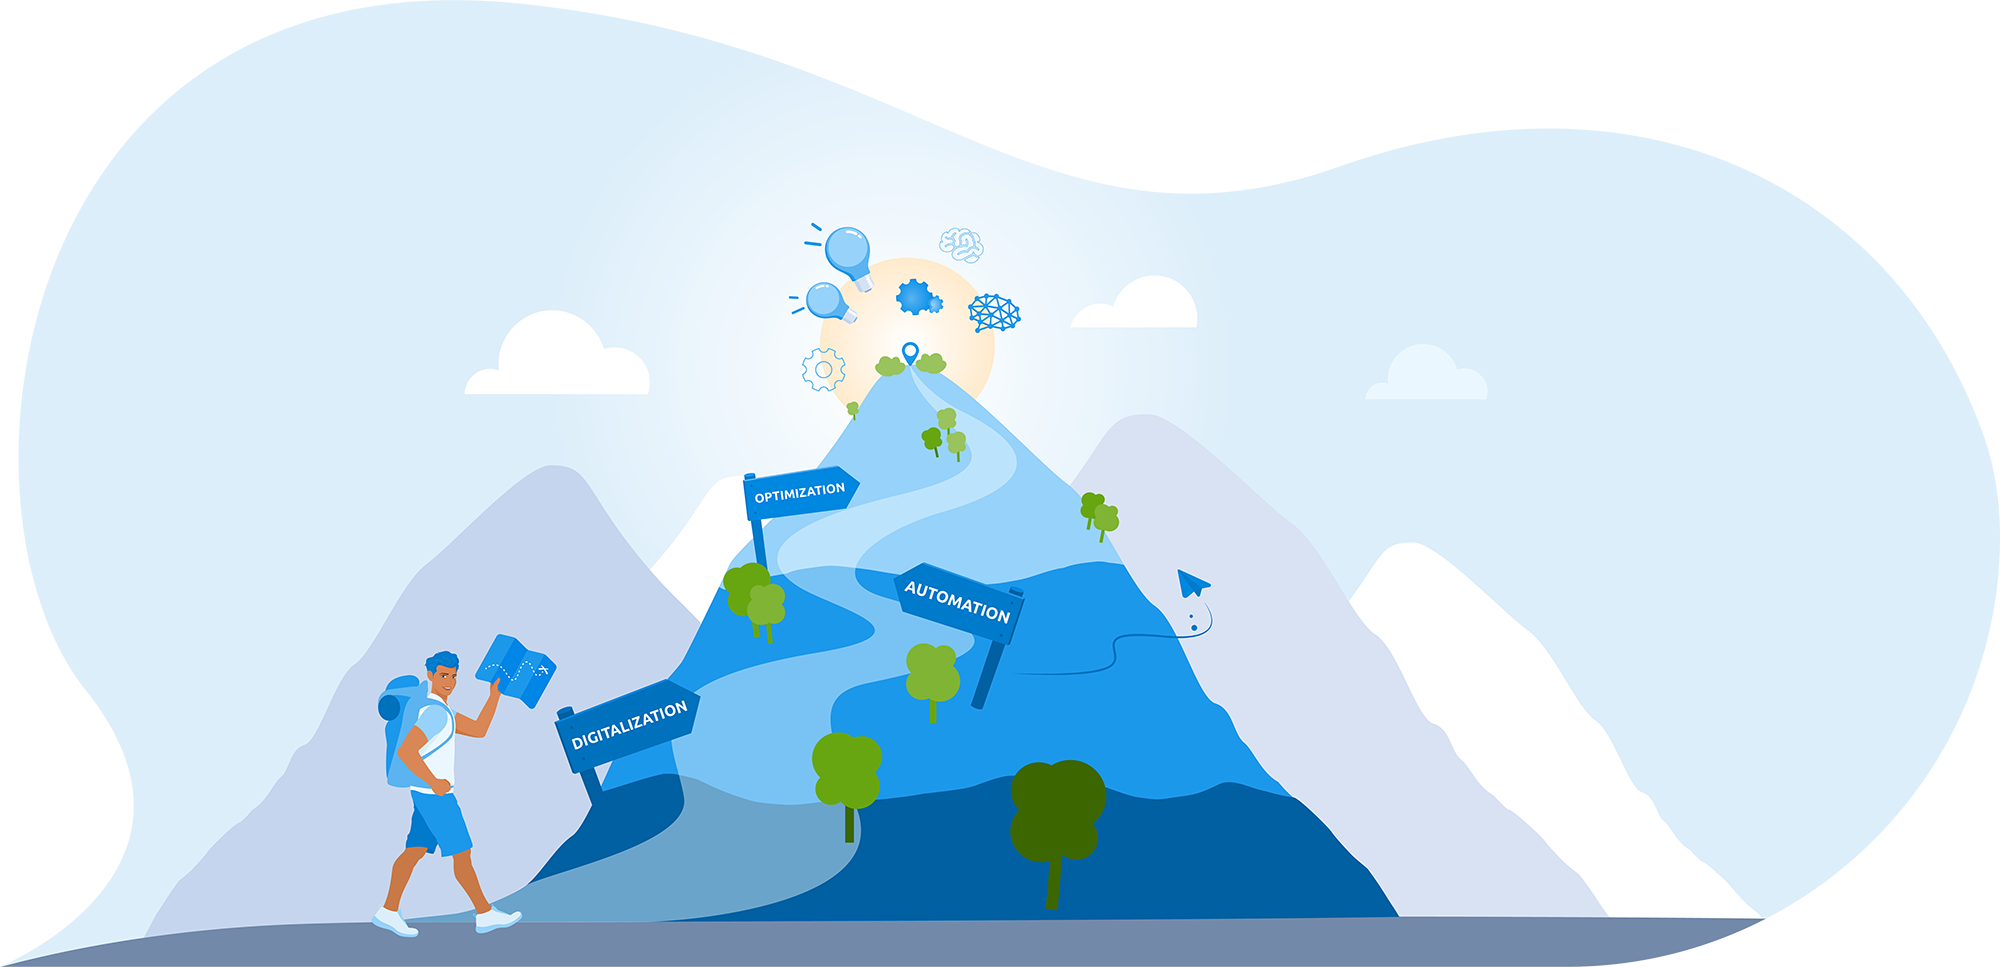 An illustration of a man hiking up a mountain, with Digitalization, Automation, and Optimization representing the peaks he will reach in his business journey.